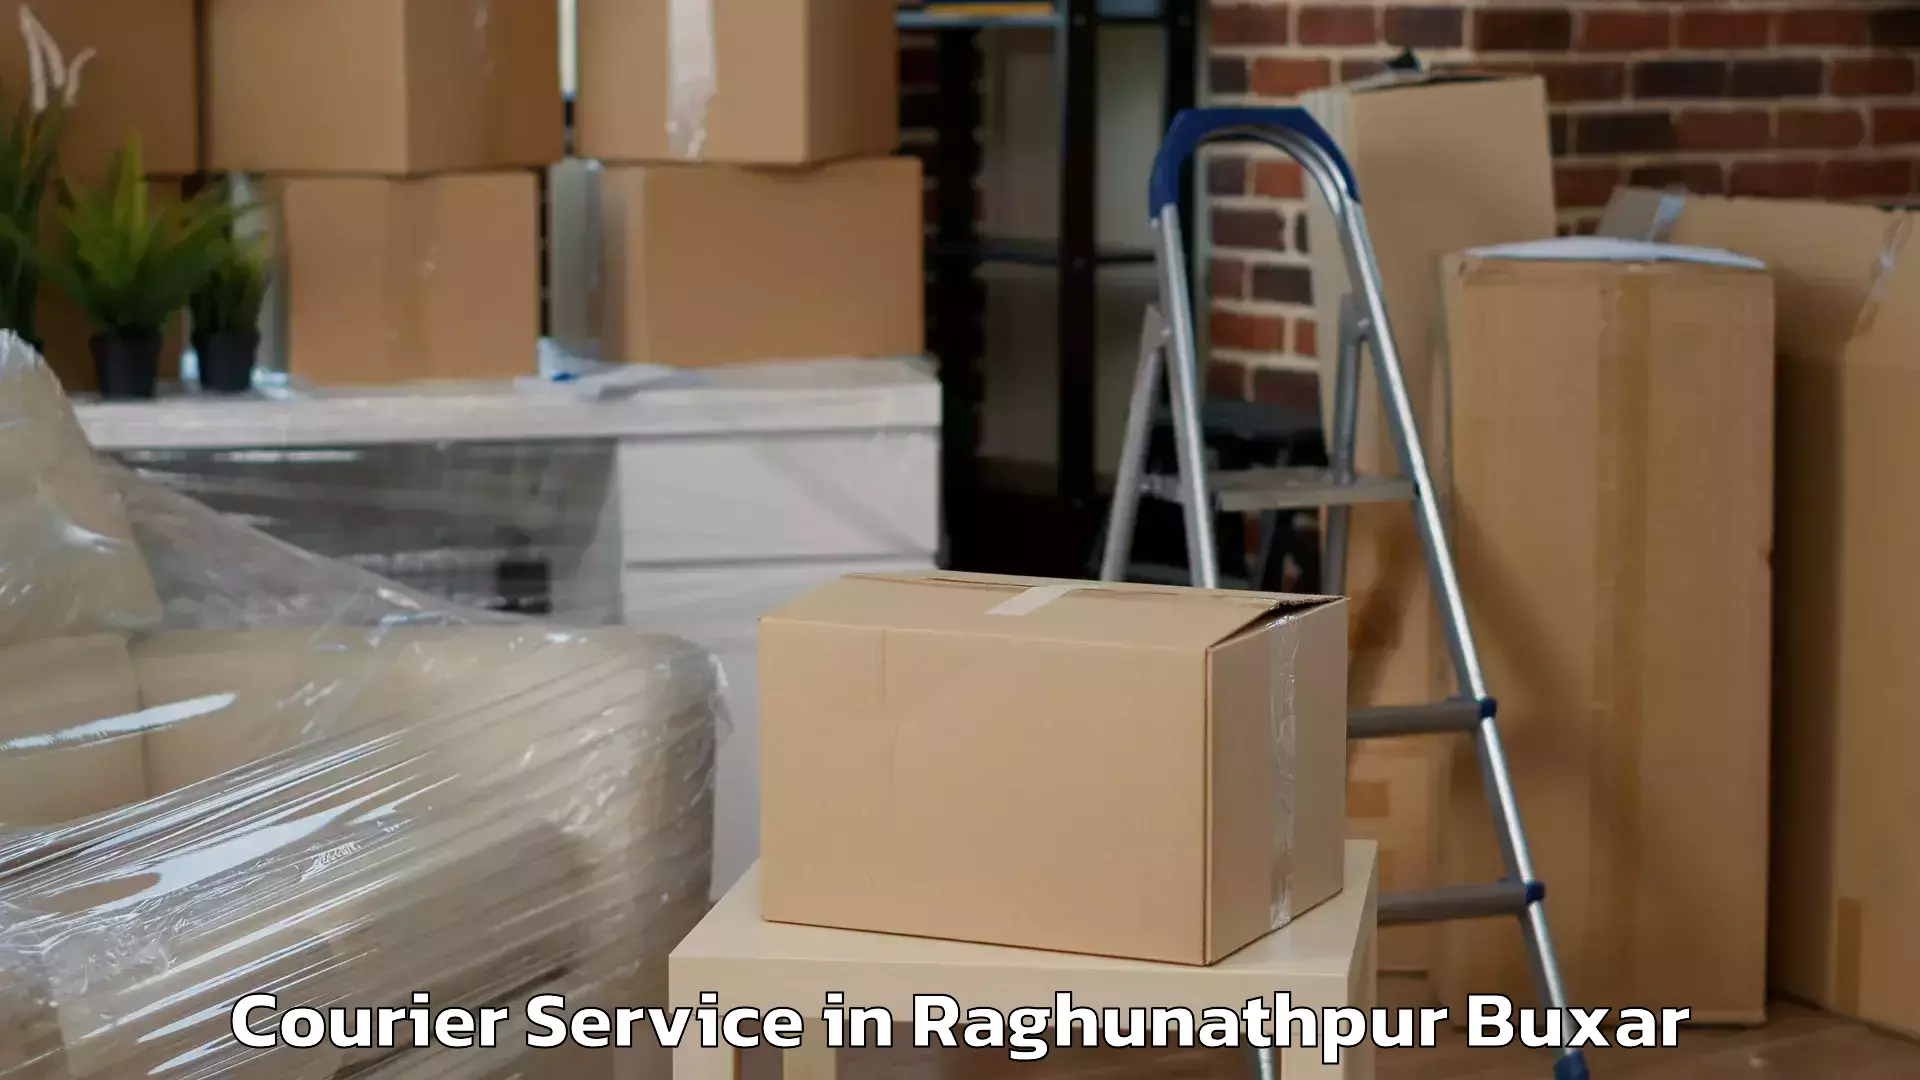 Multi-national courier services in Raghunathpur Buxar